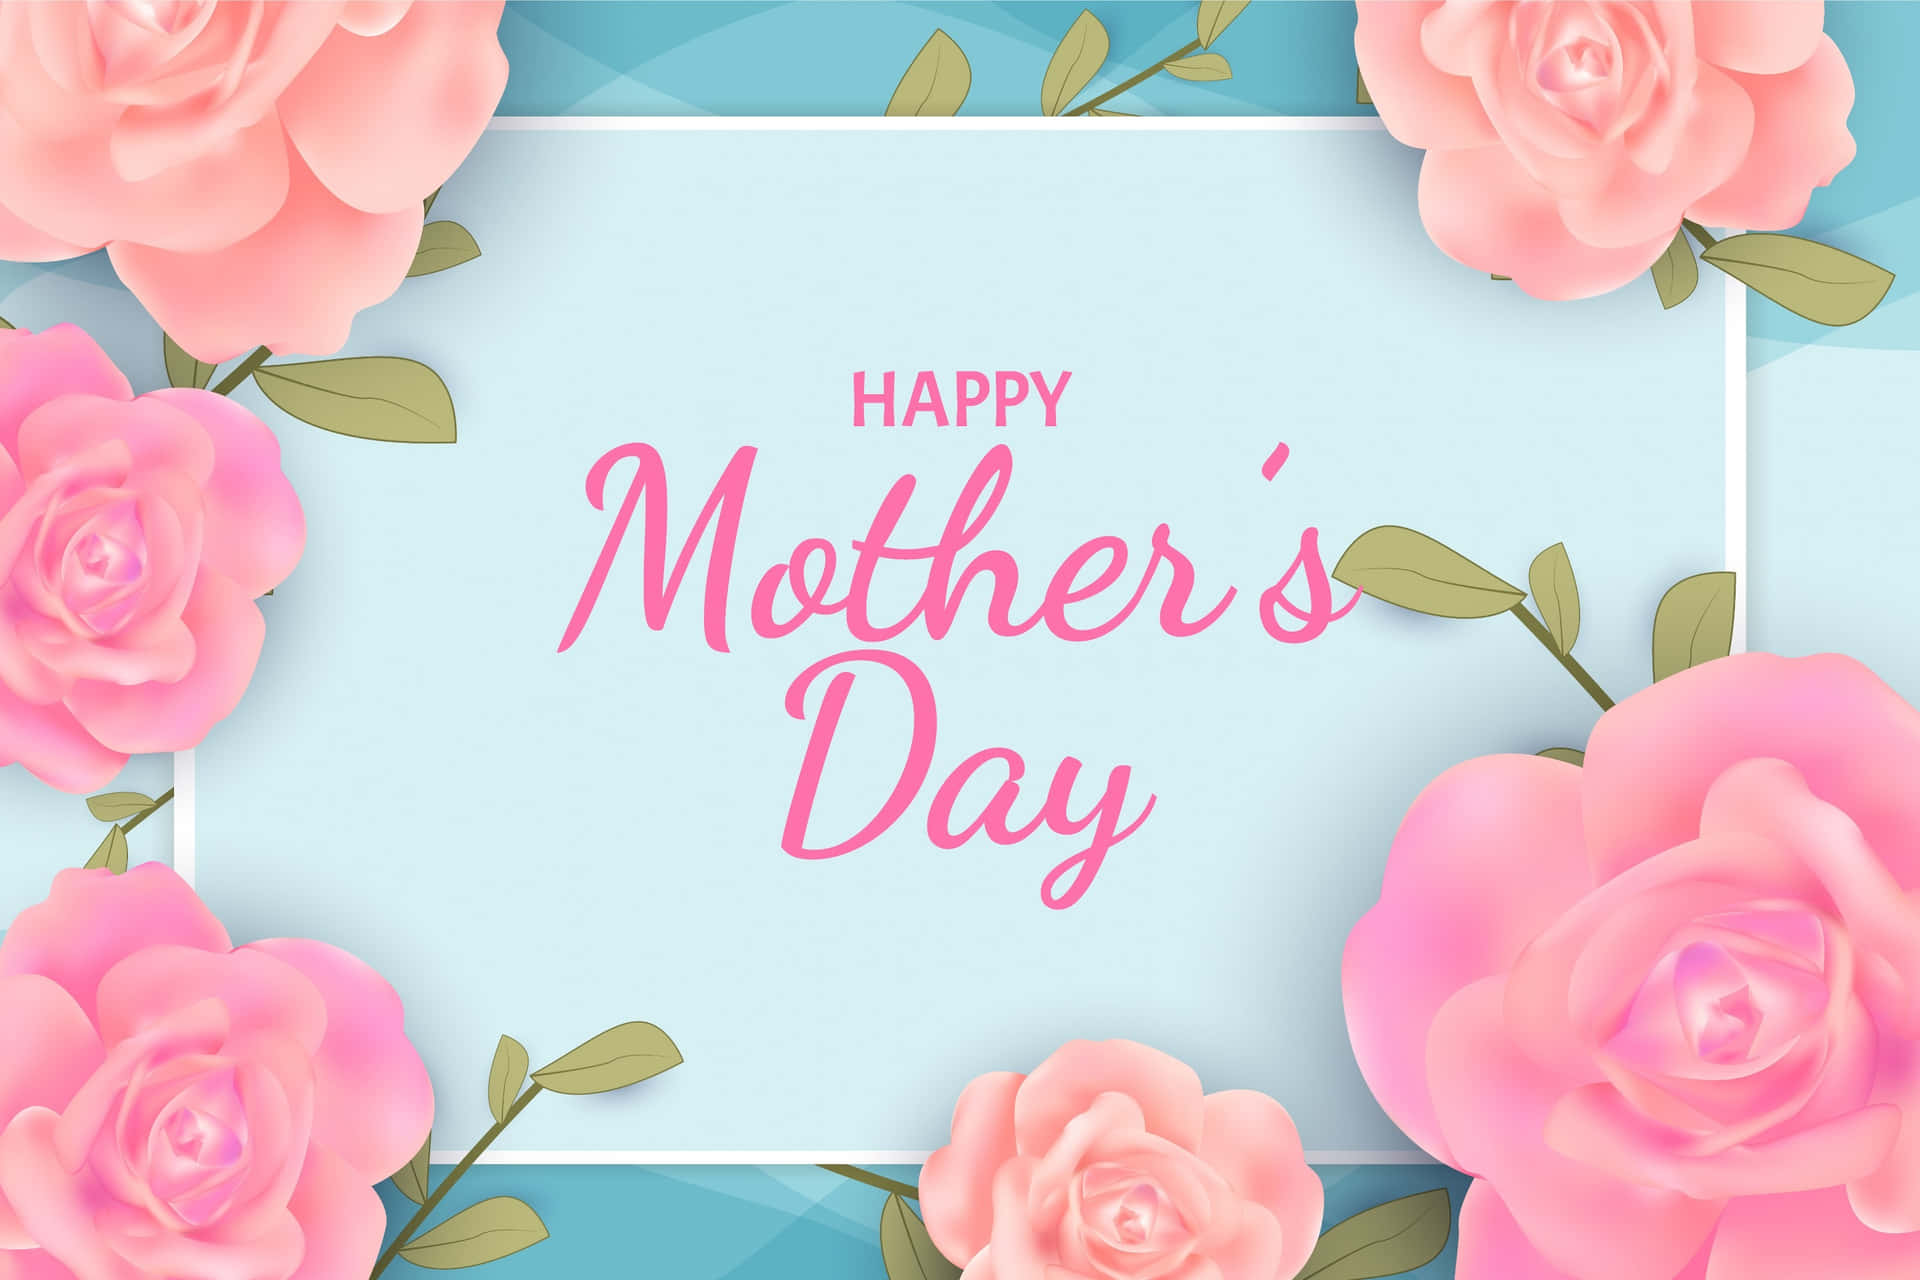 Happy Mother's Day Card With Pink Roses